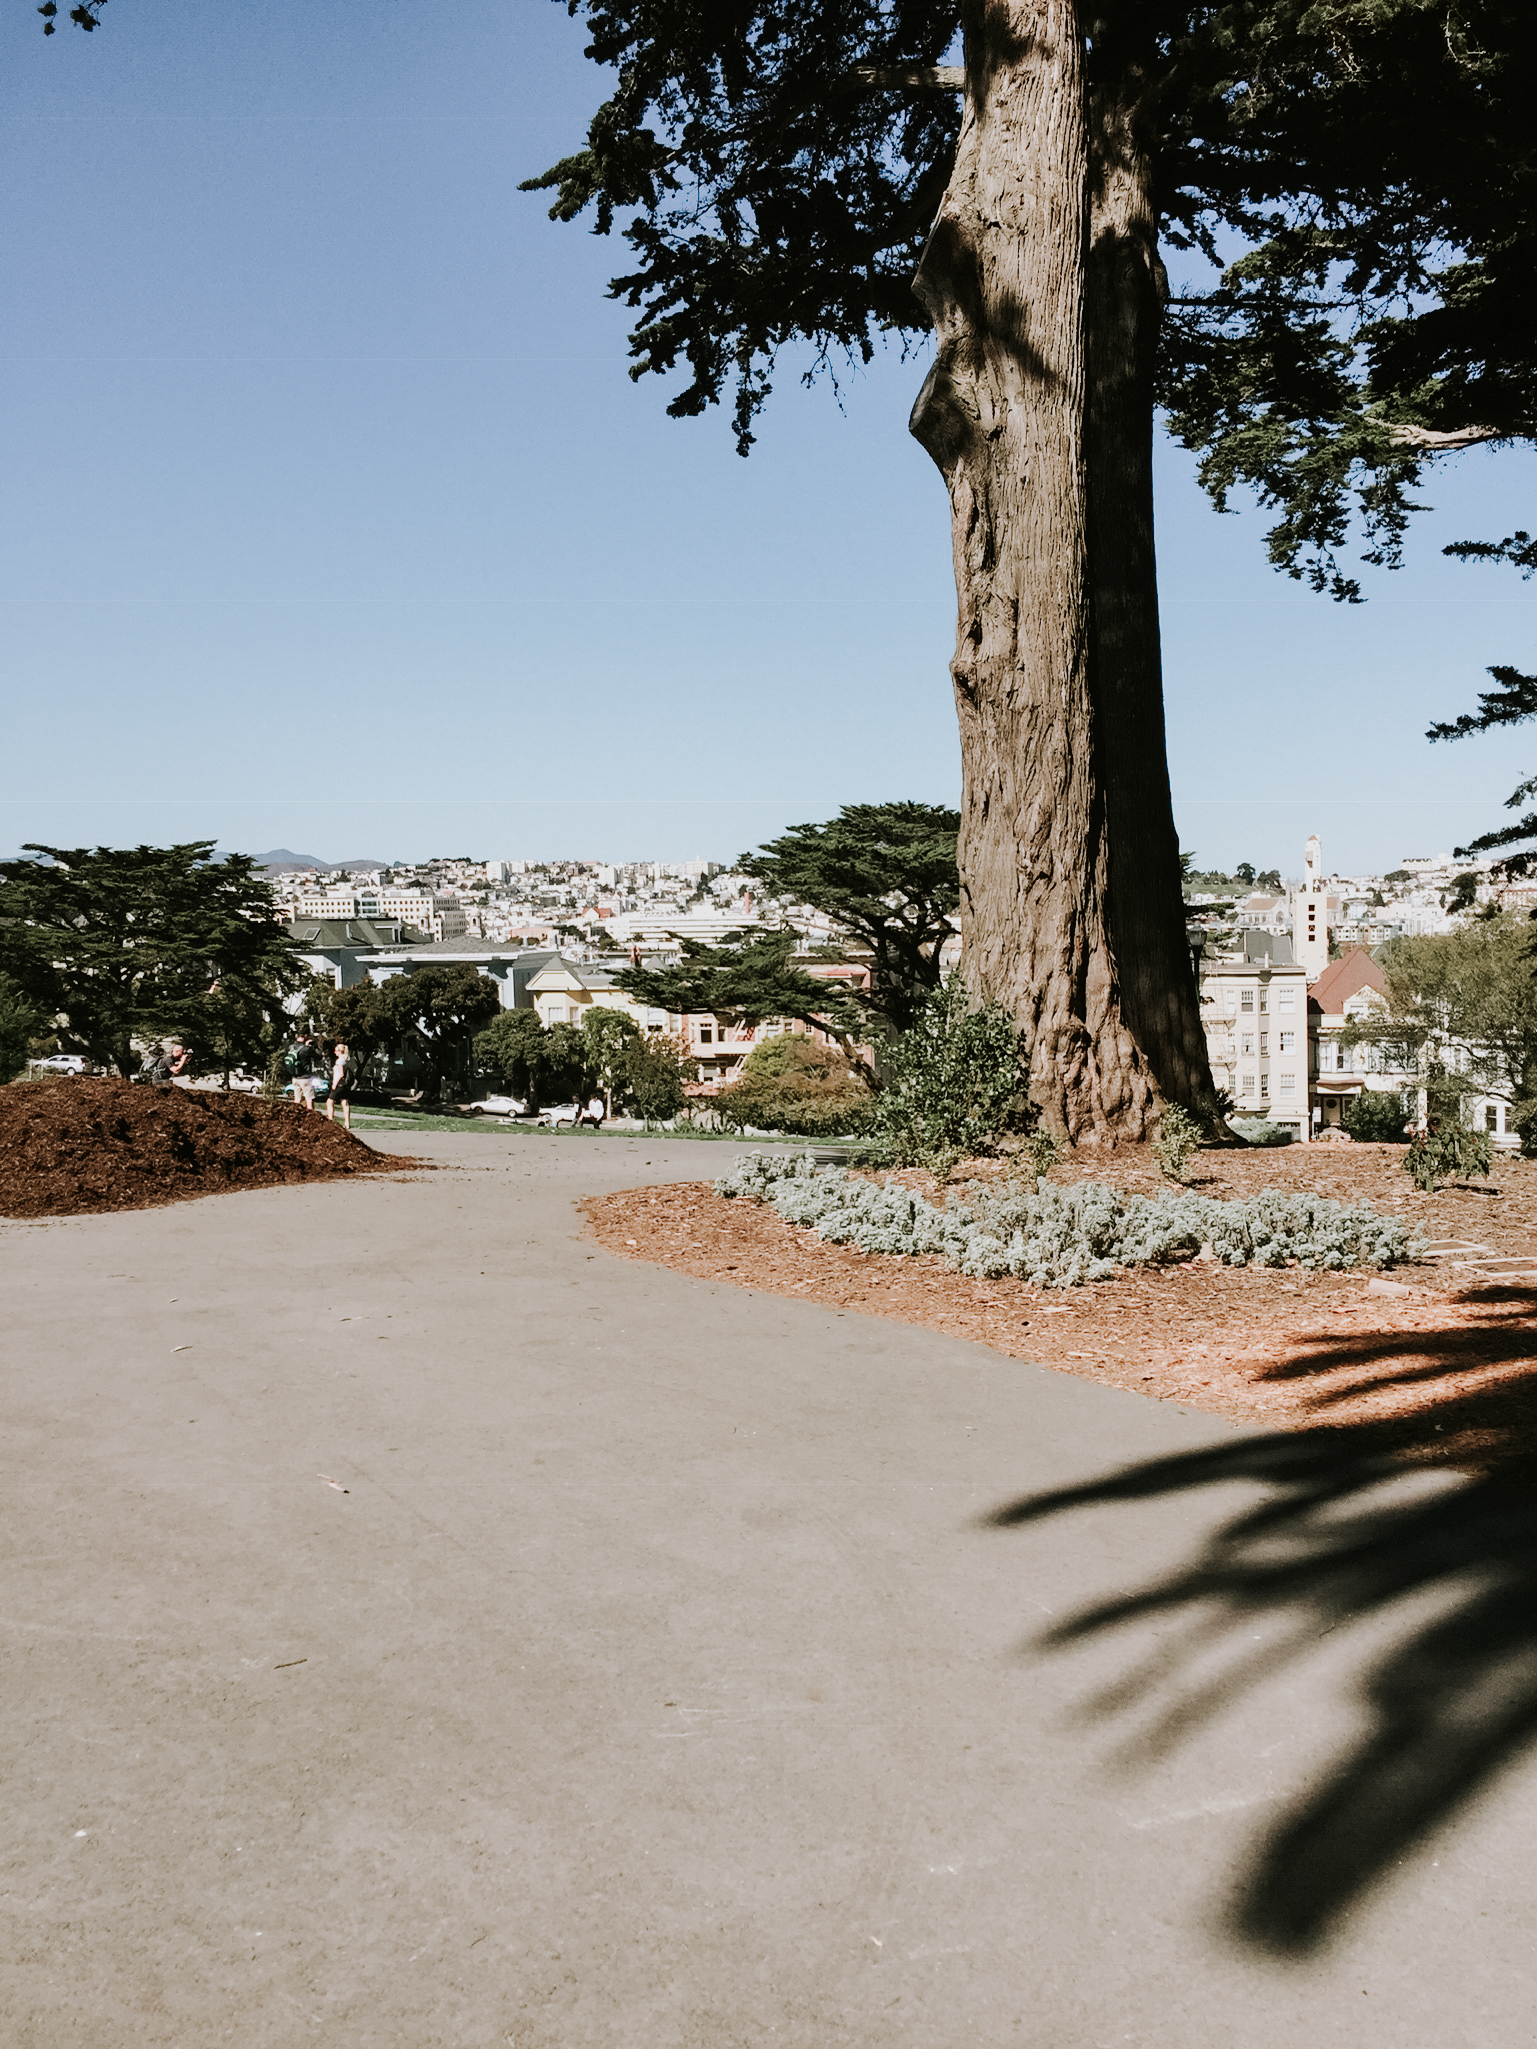 Our trip to San Francisco - the painted ladies park